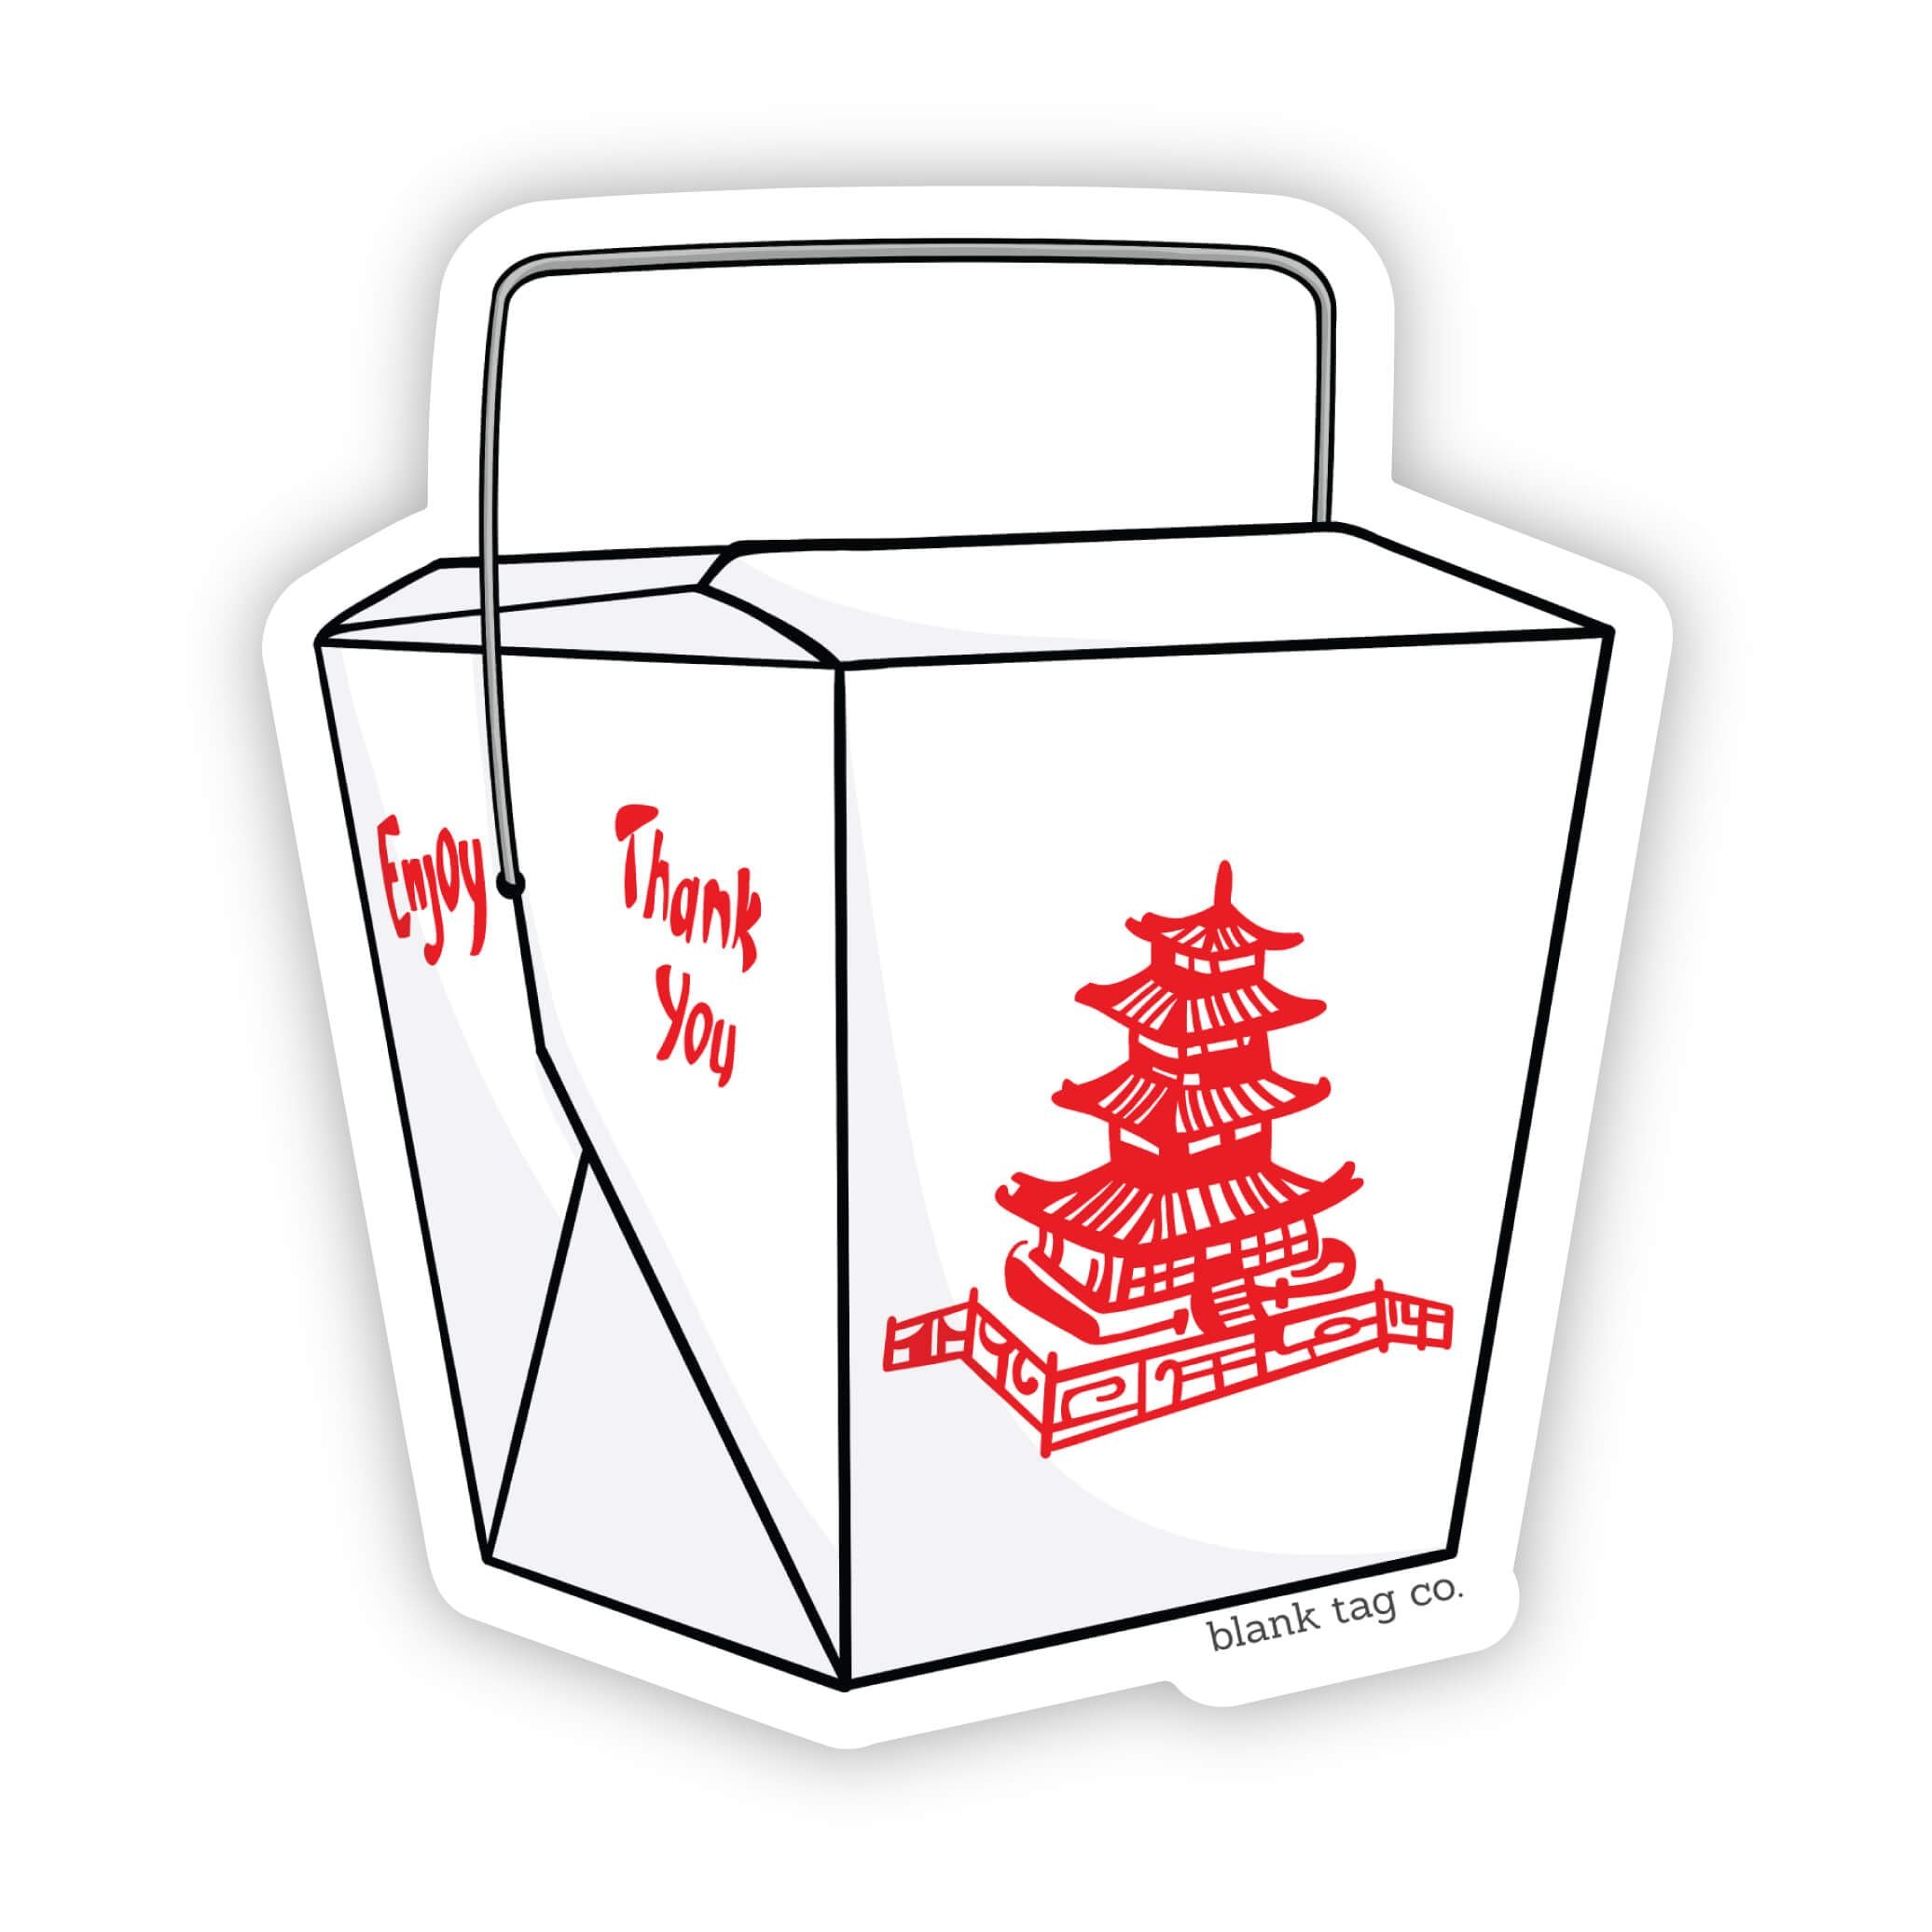 The Takeout Container Sticker